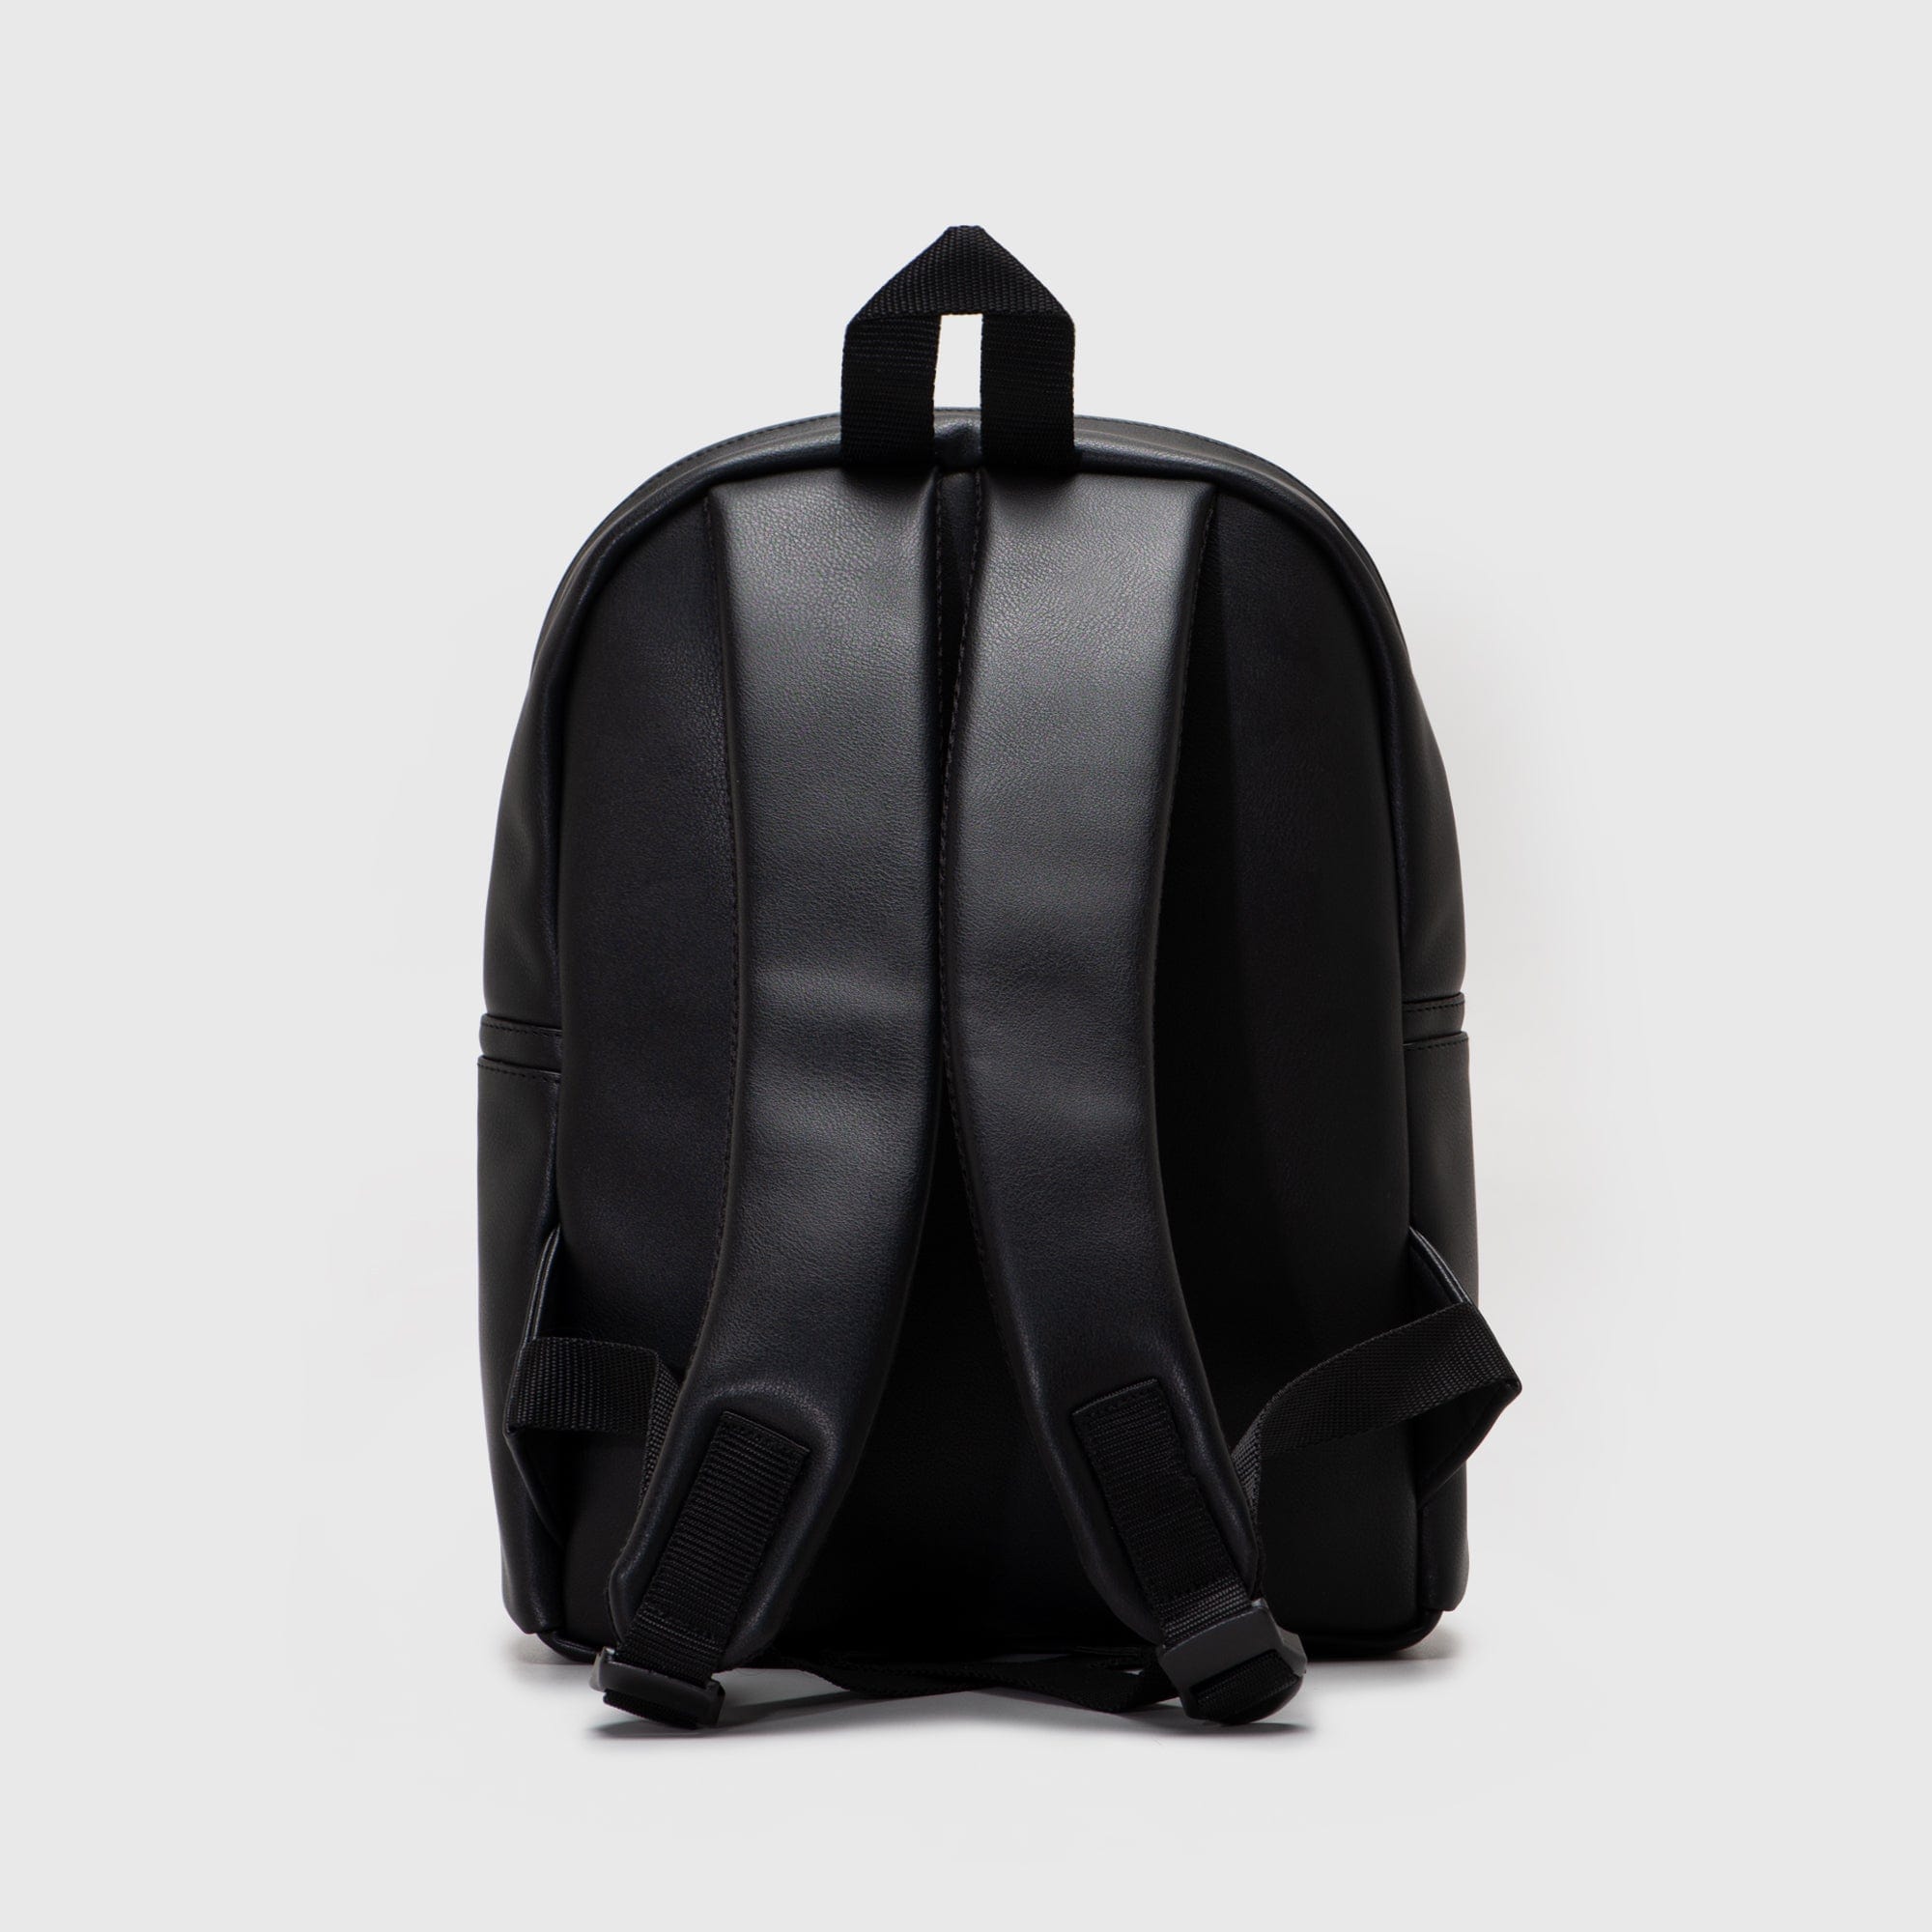 Adorable Projects Official Adorableprojects - Nalabu Mini Backpack Black - Tas Ransel